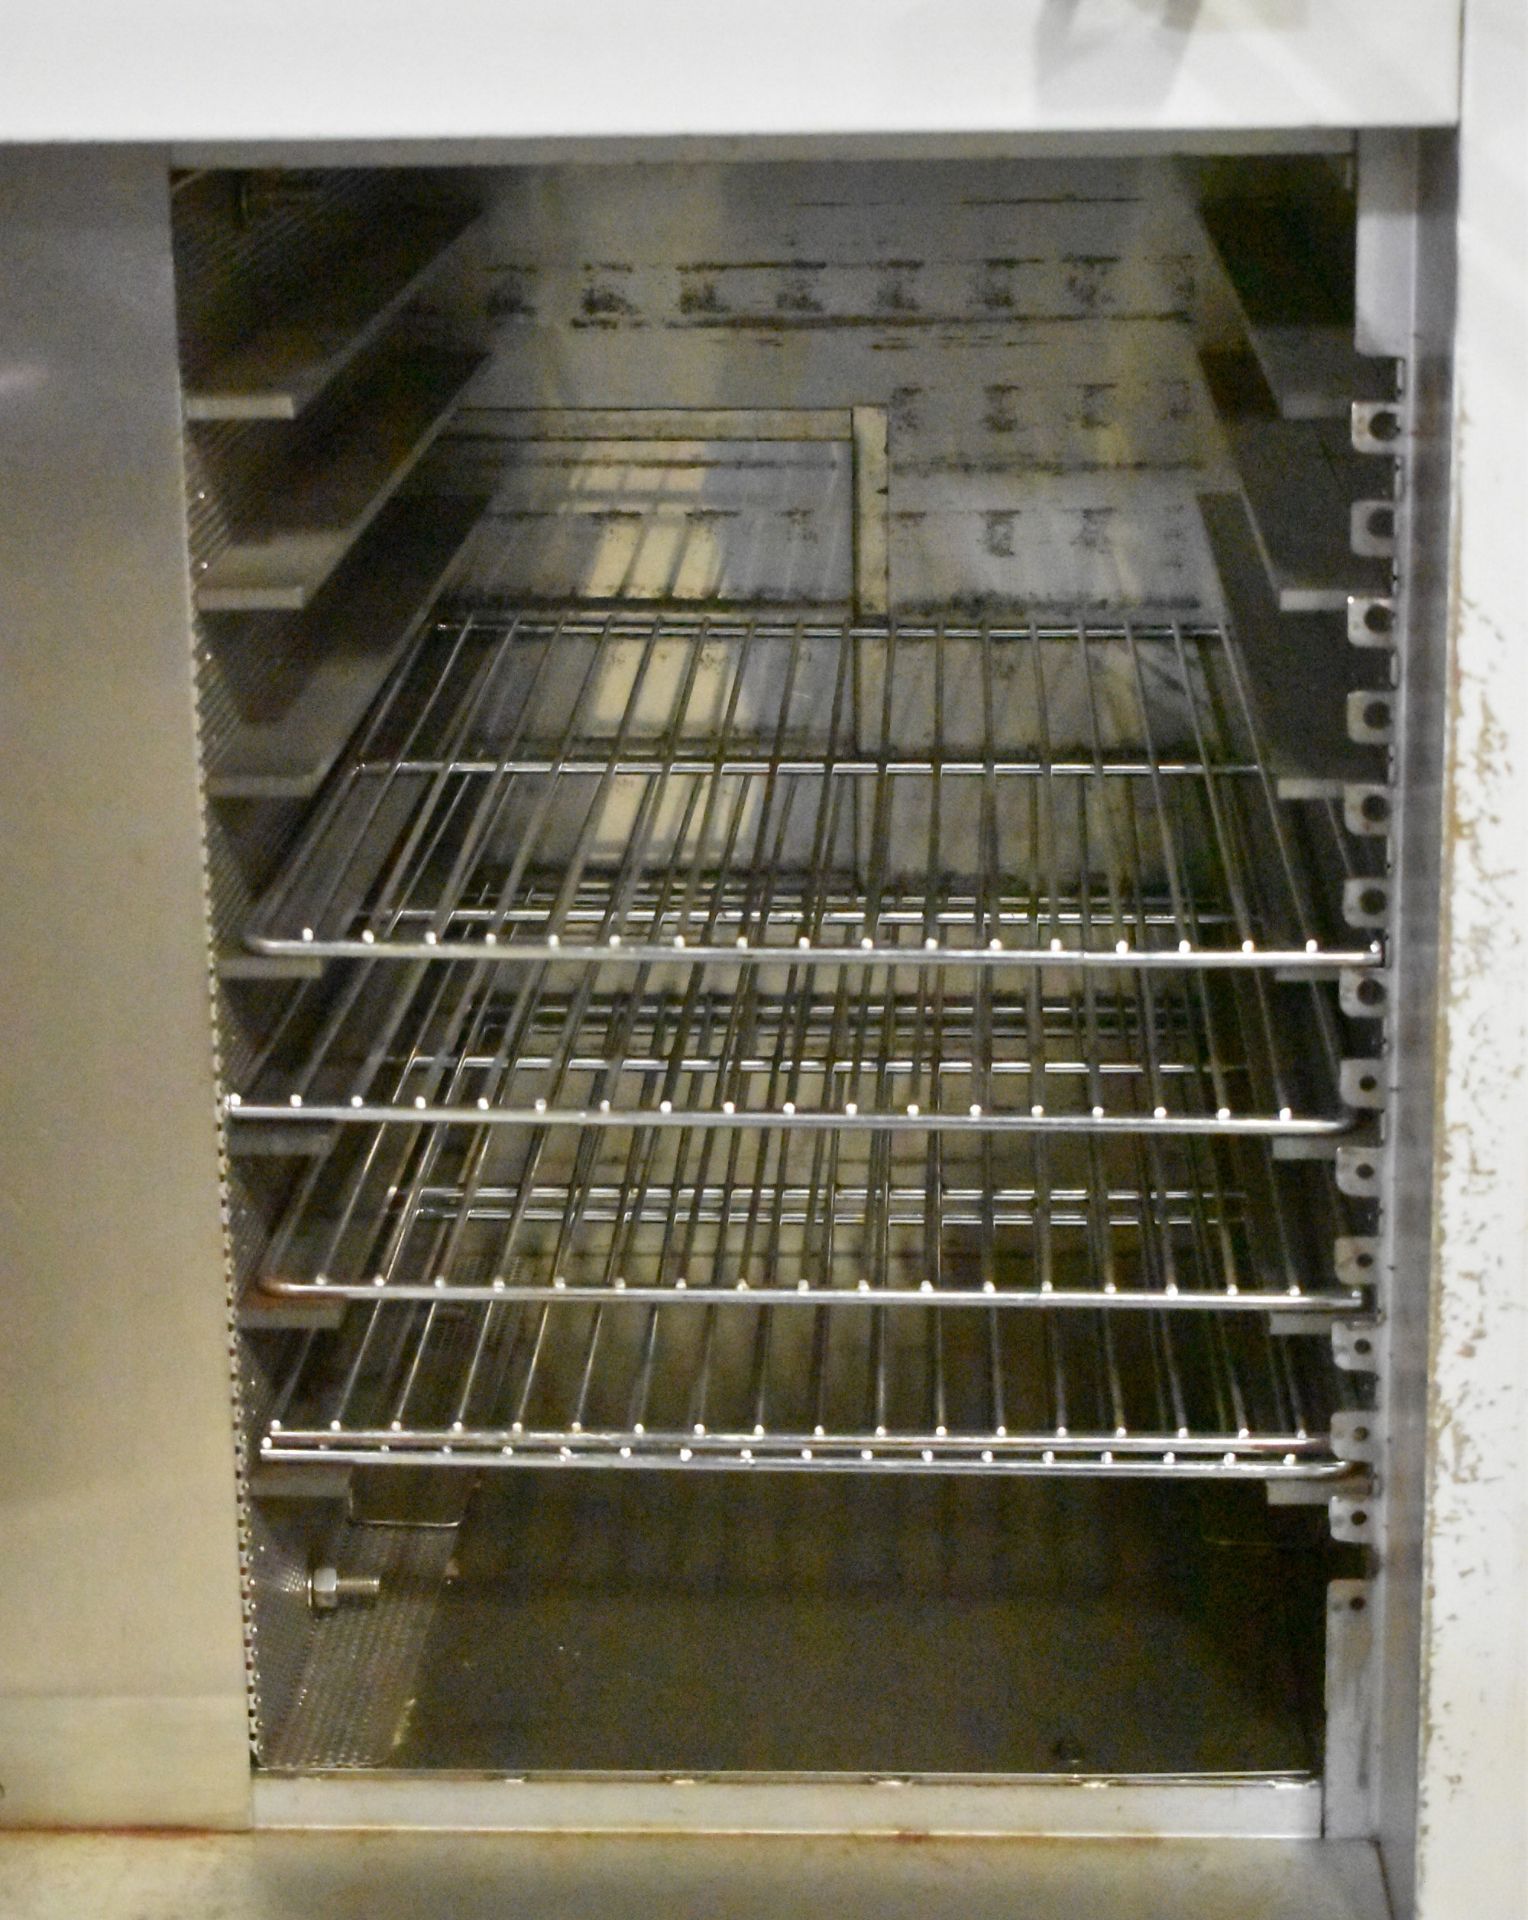 DESPATCH LFD1-42-2 ELECTRIC BENCH OVEN WITH 600 DEG. F. MAX. TEMPERATURE, 4500 WATT HEATER, 21"X21" - Image 3 of 4